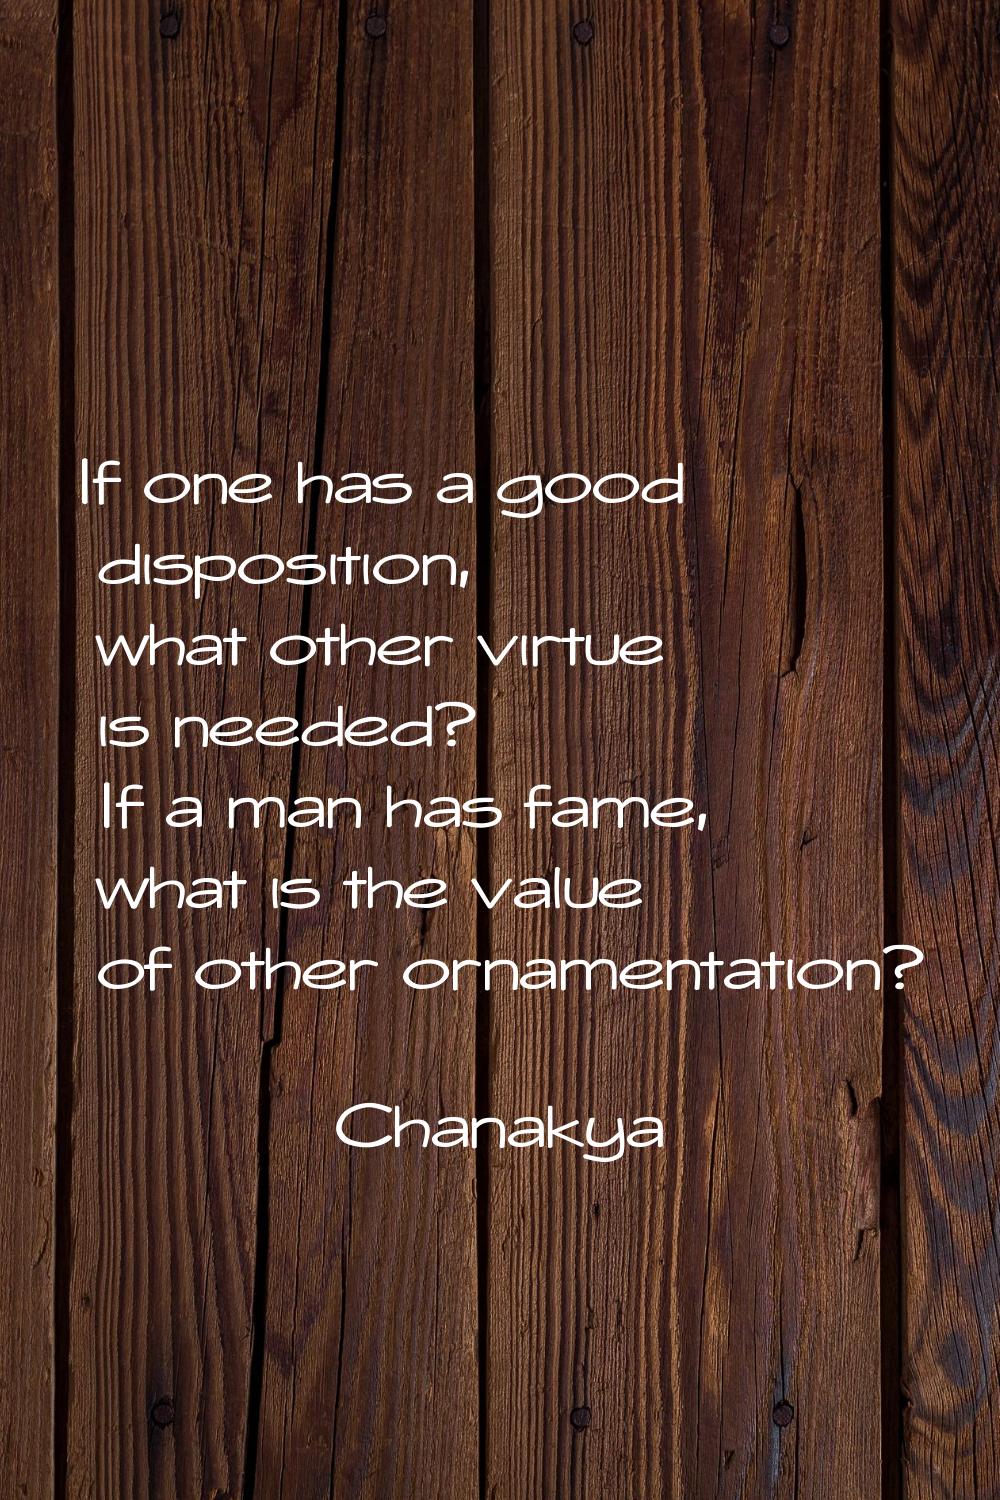 If one has a good disposition, what other virtue is needed? If a man has fame, what is the value of